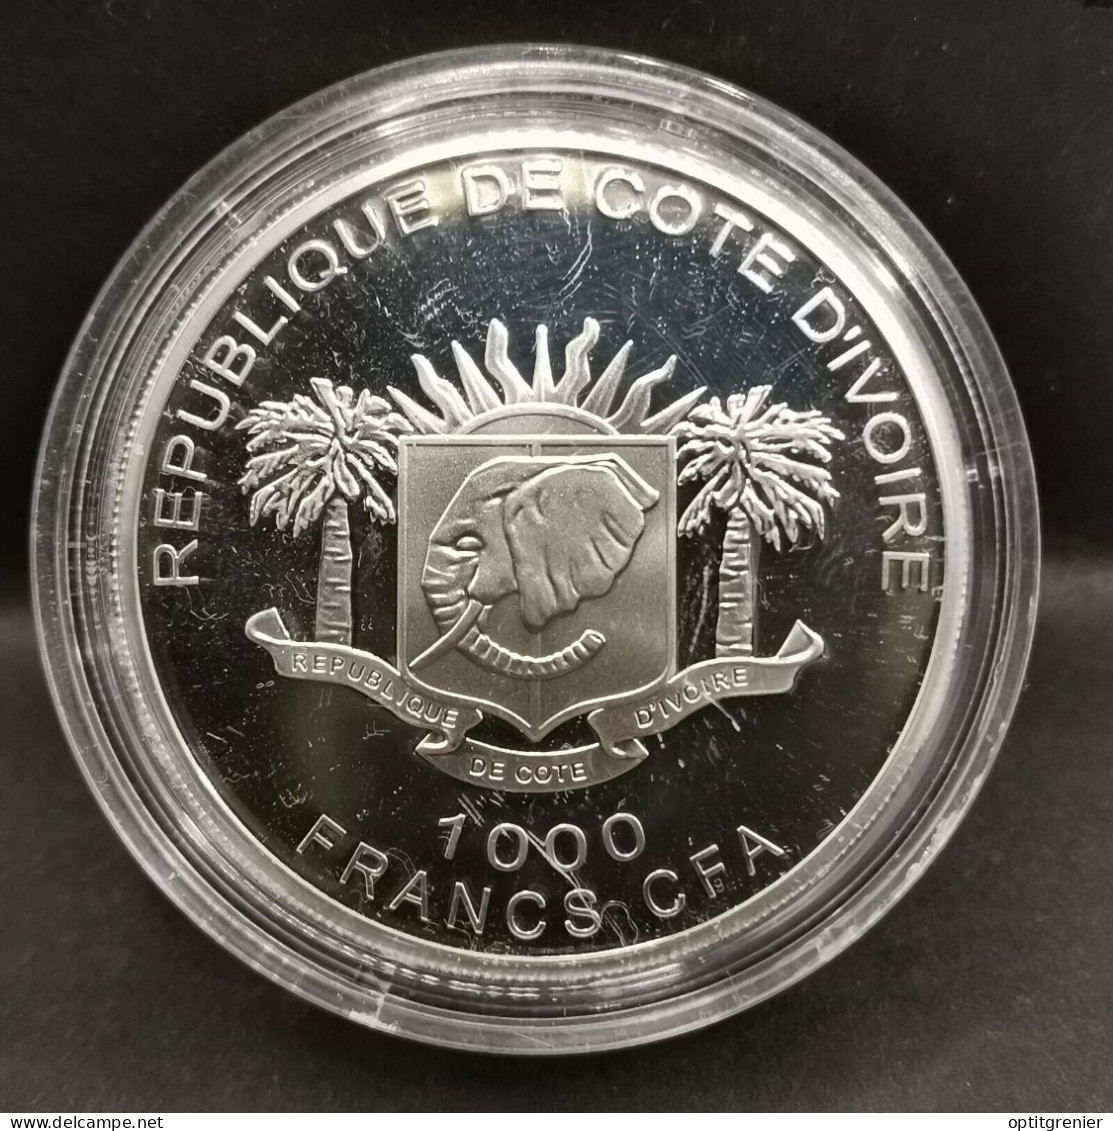 1000 FRANCS ARGENT BE CFA 2010 MAMMOUTH AFRICAIN COTE D'IVOIRE 2500 EX. / PROOF - Costa D'Avorio